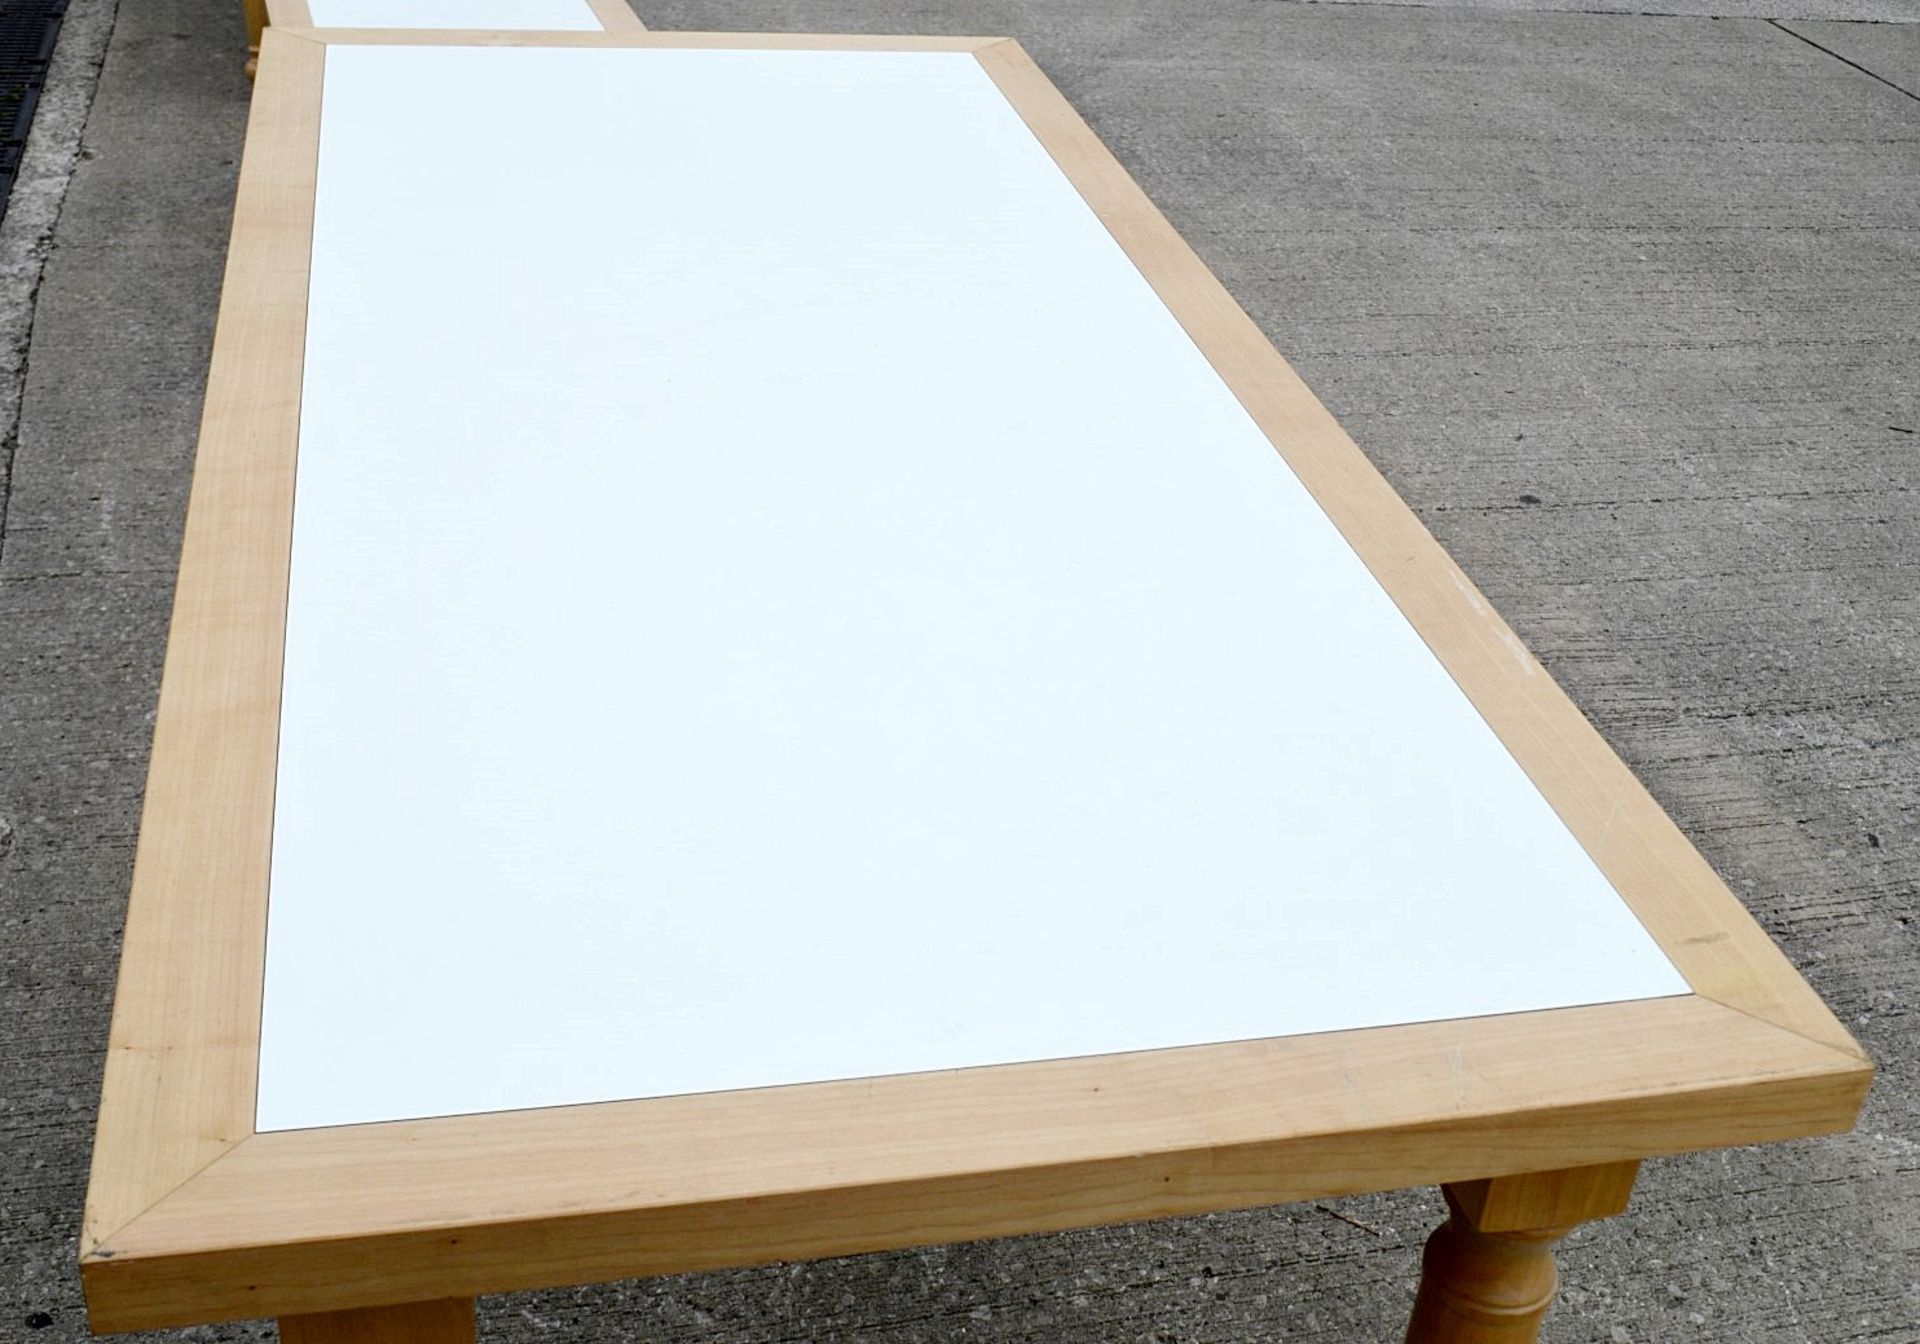 1 x Large Rectangular Event Table In Beech - Features Attractive Turned Legs And A White Inlay - Image 3 of 3